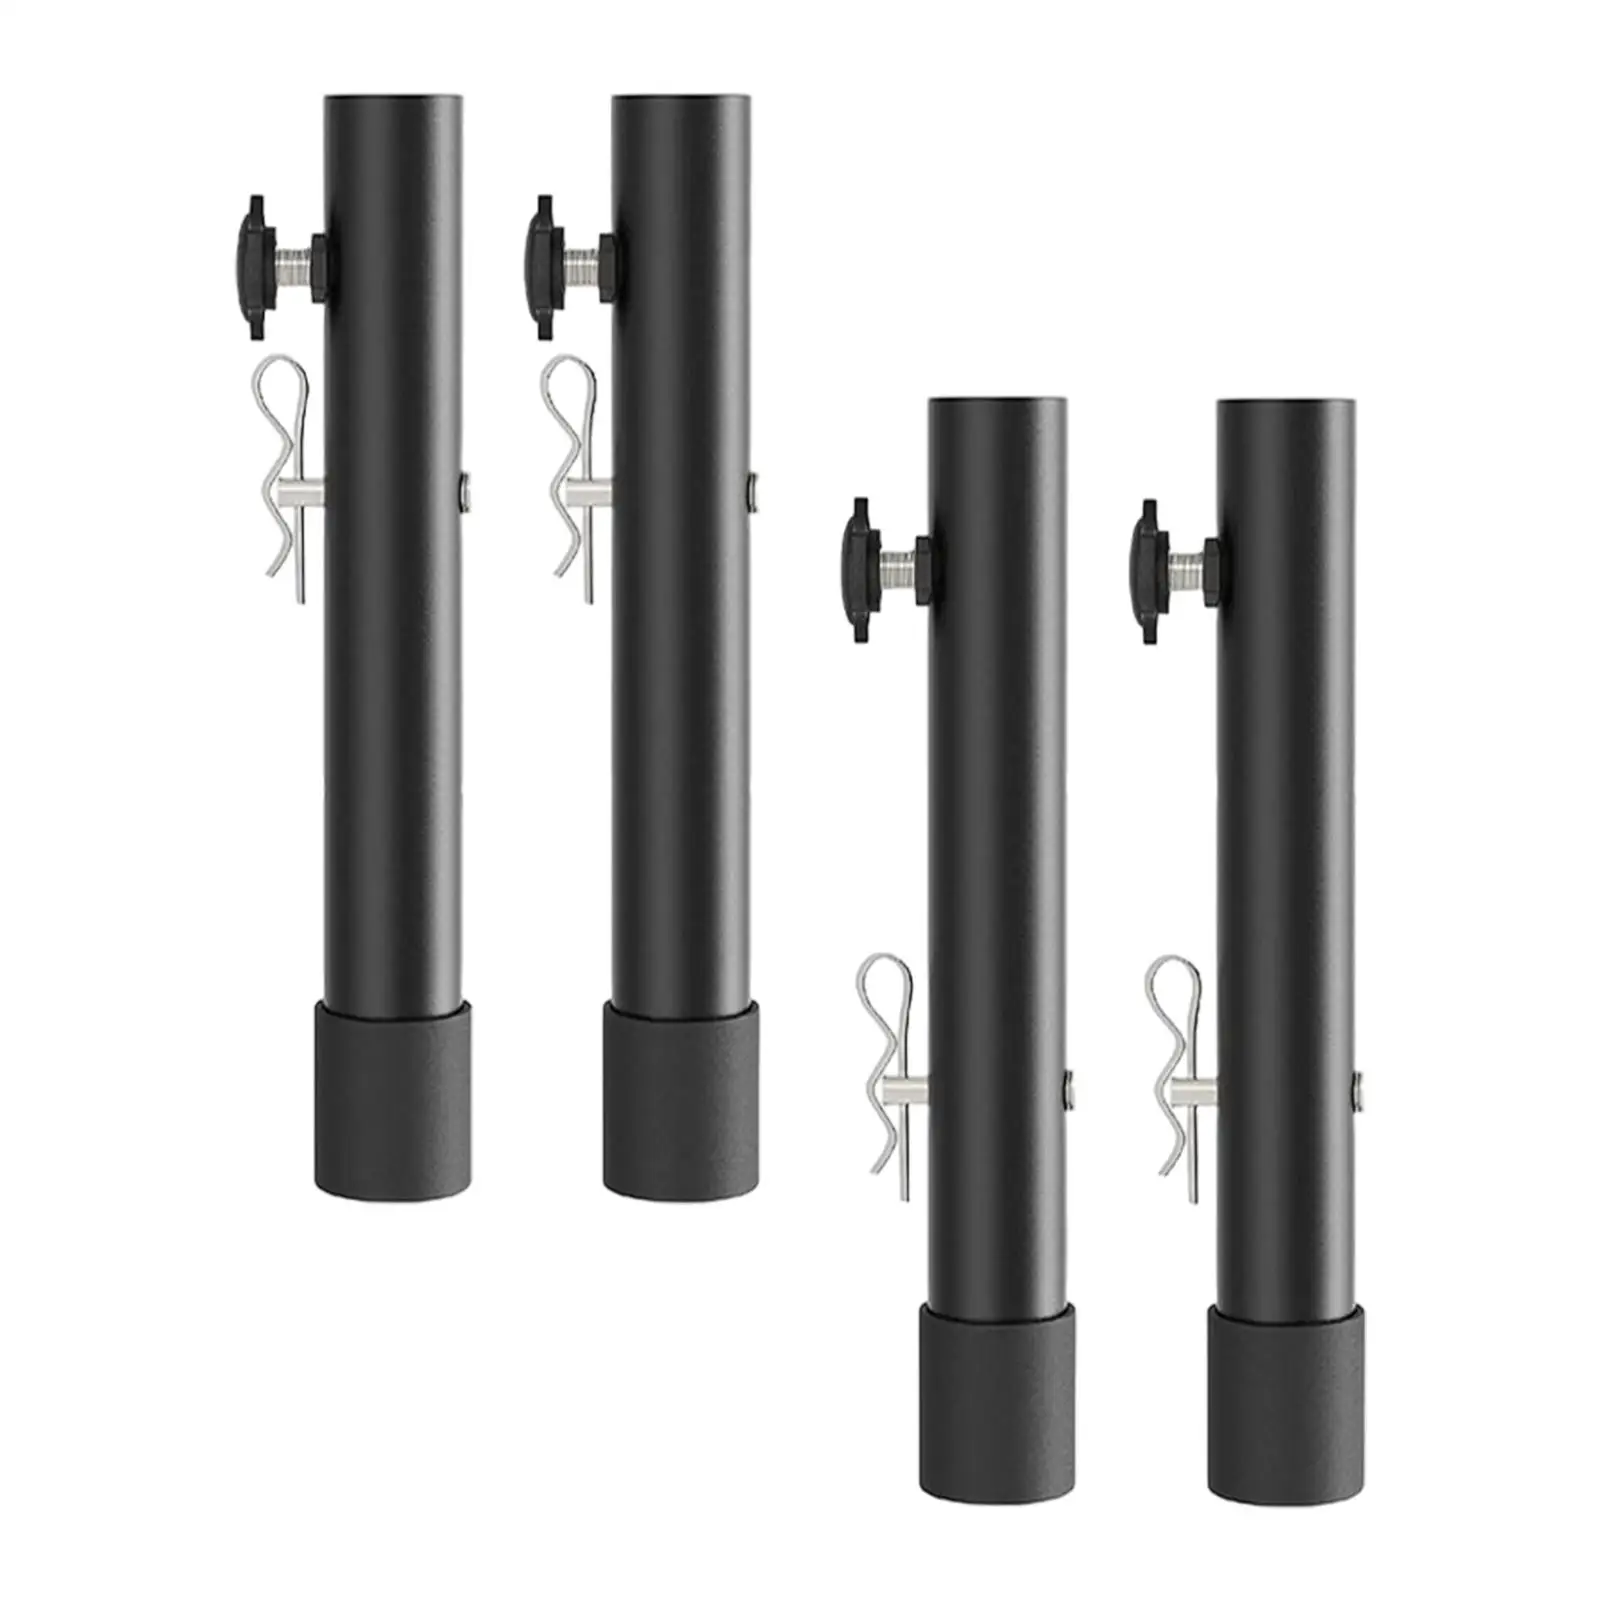 Table Leg Table Height Extenders Adjustable Table Legs for Folding, Straight, and Bent Table Legs, Metal, Durable, Heavy Duty